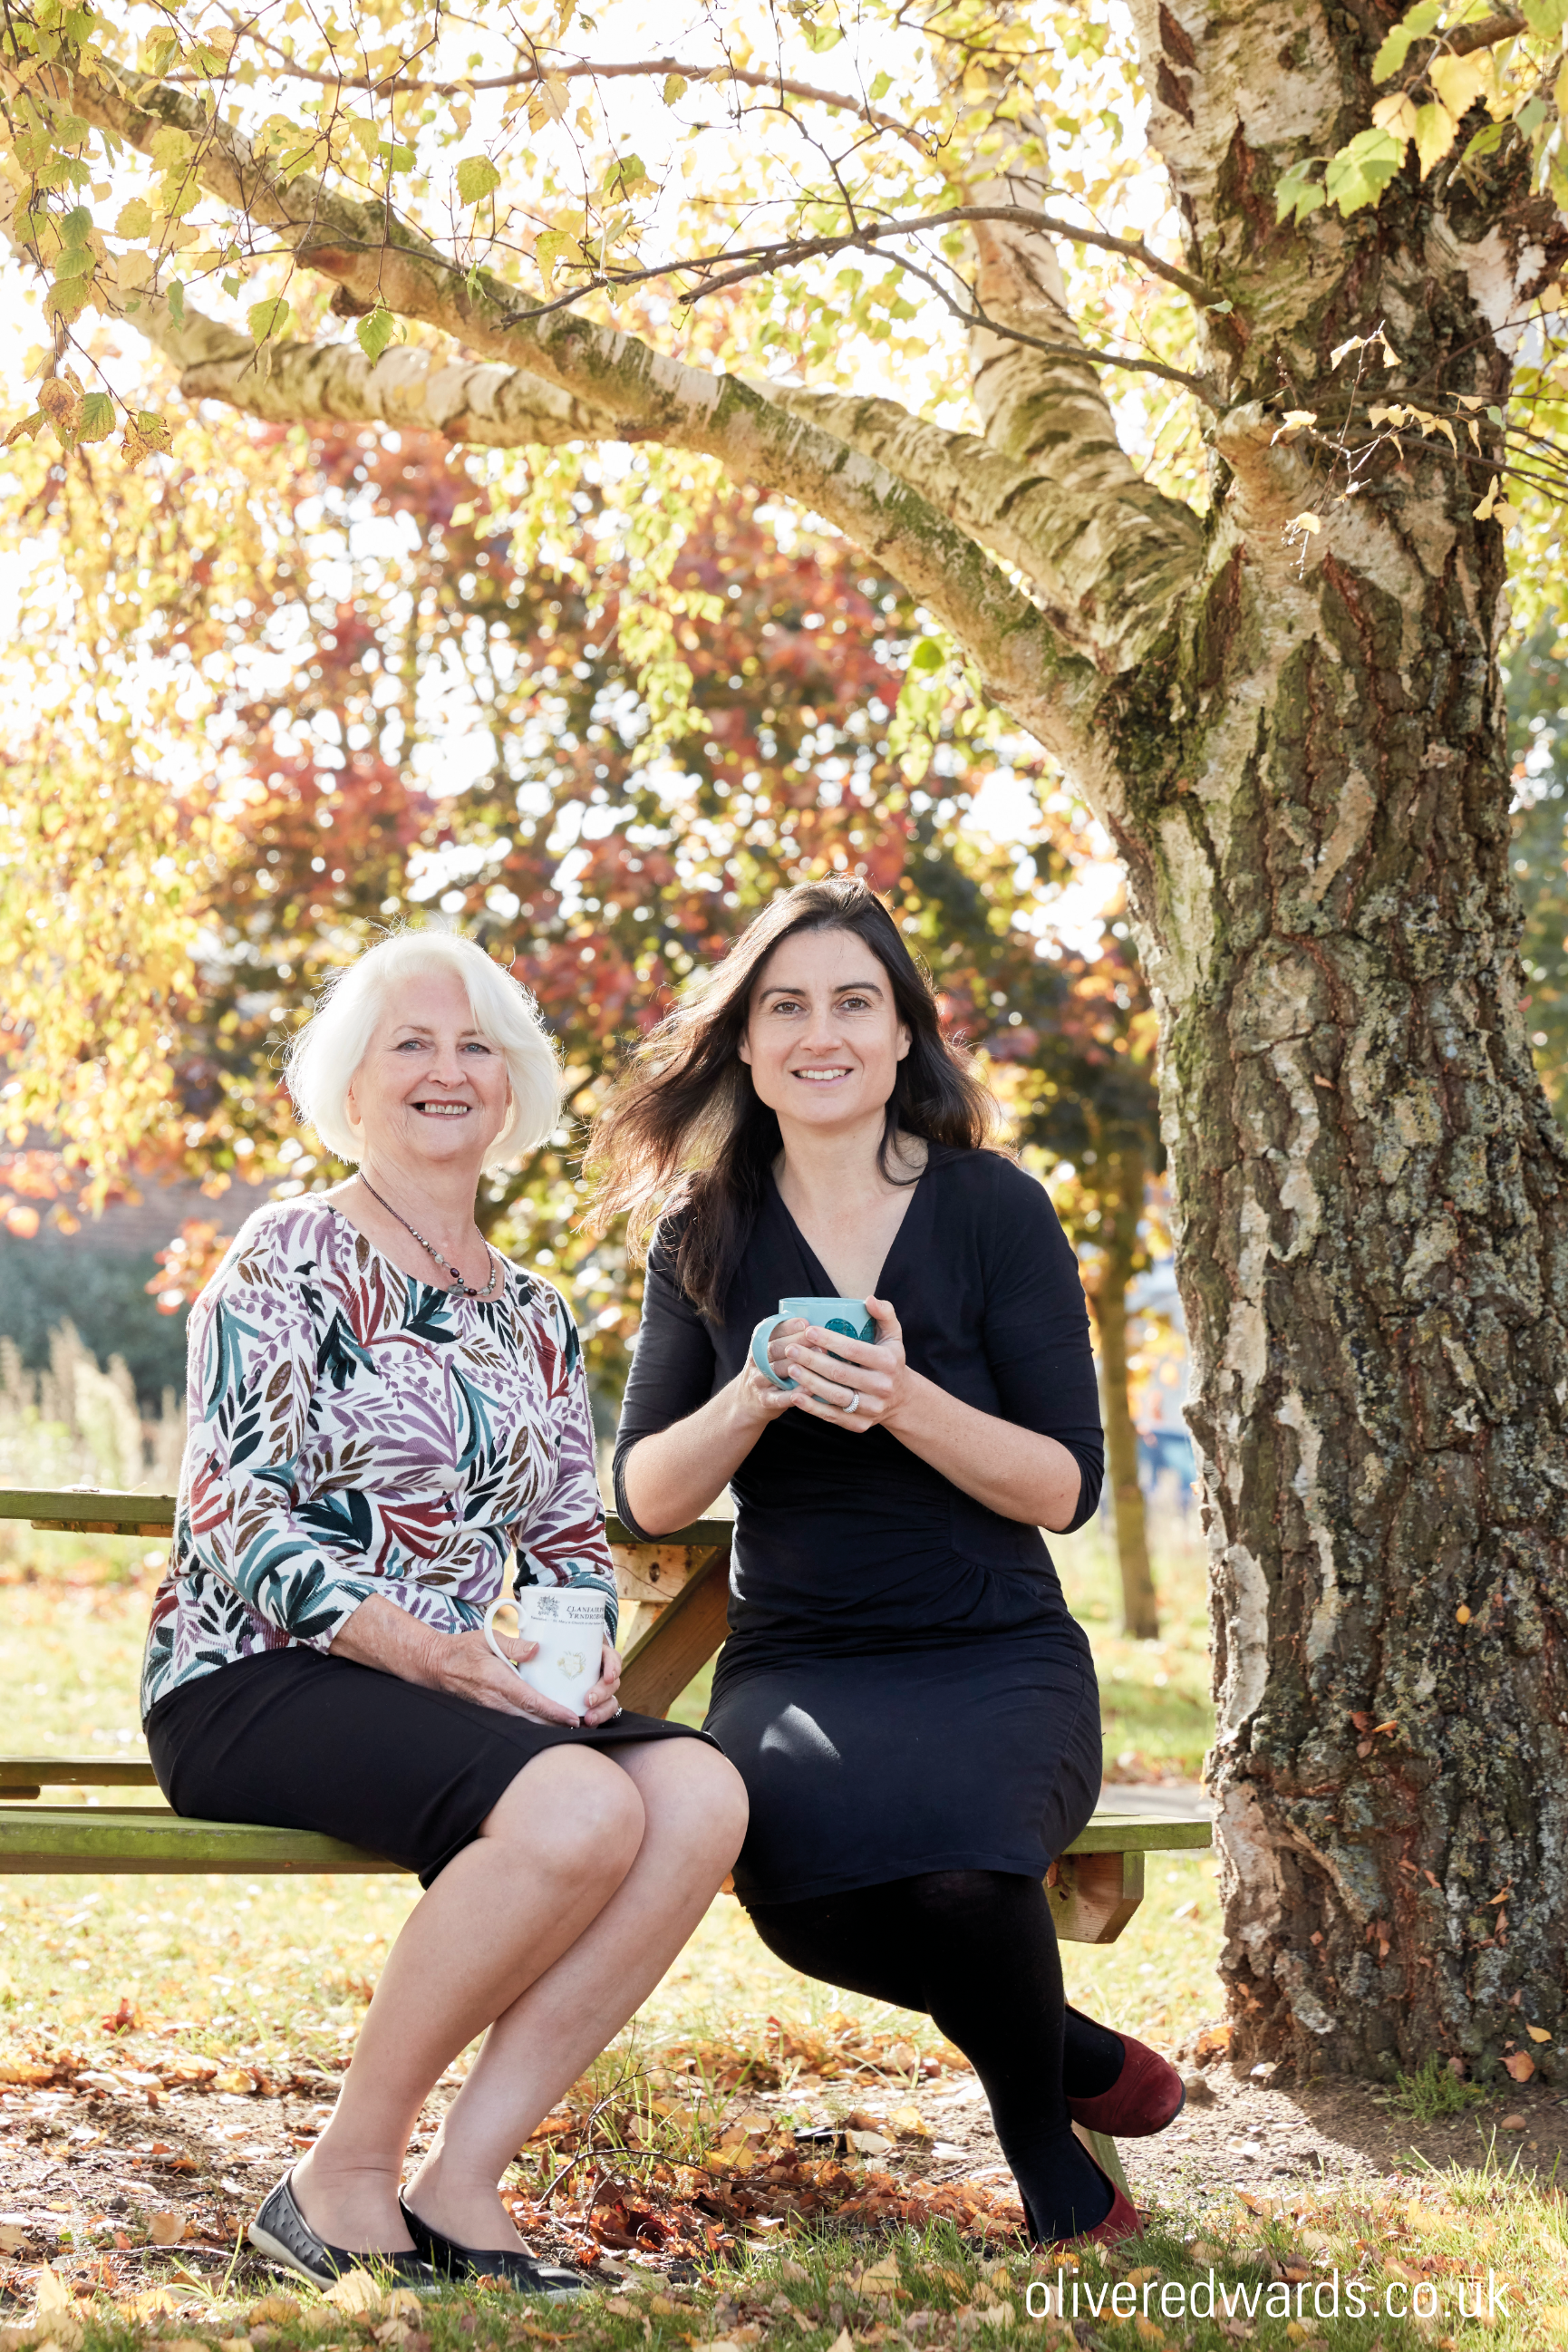 Odylique founder Margaret with daughter Abbie, sitting on a bench under a tree.